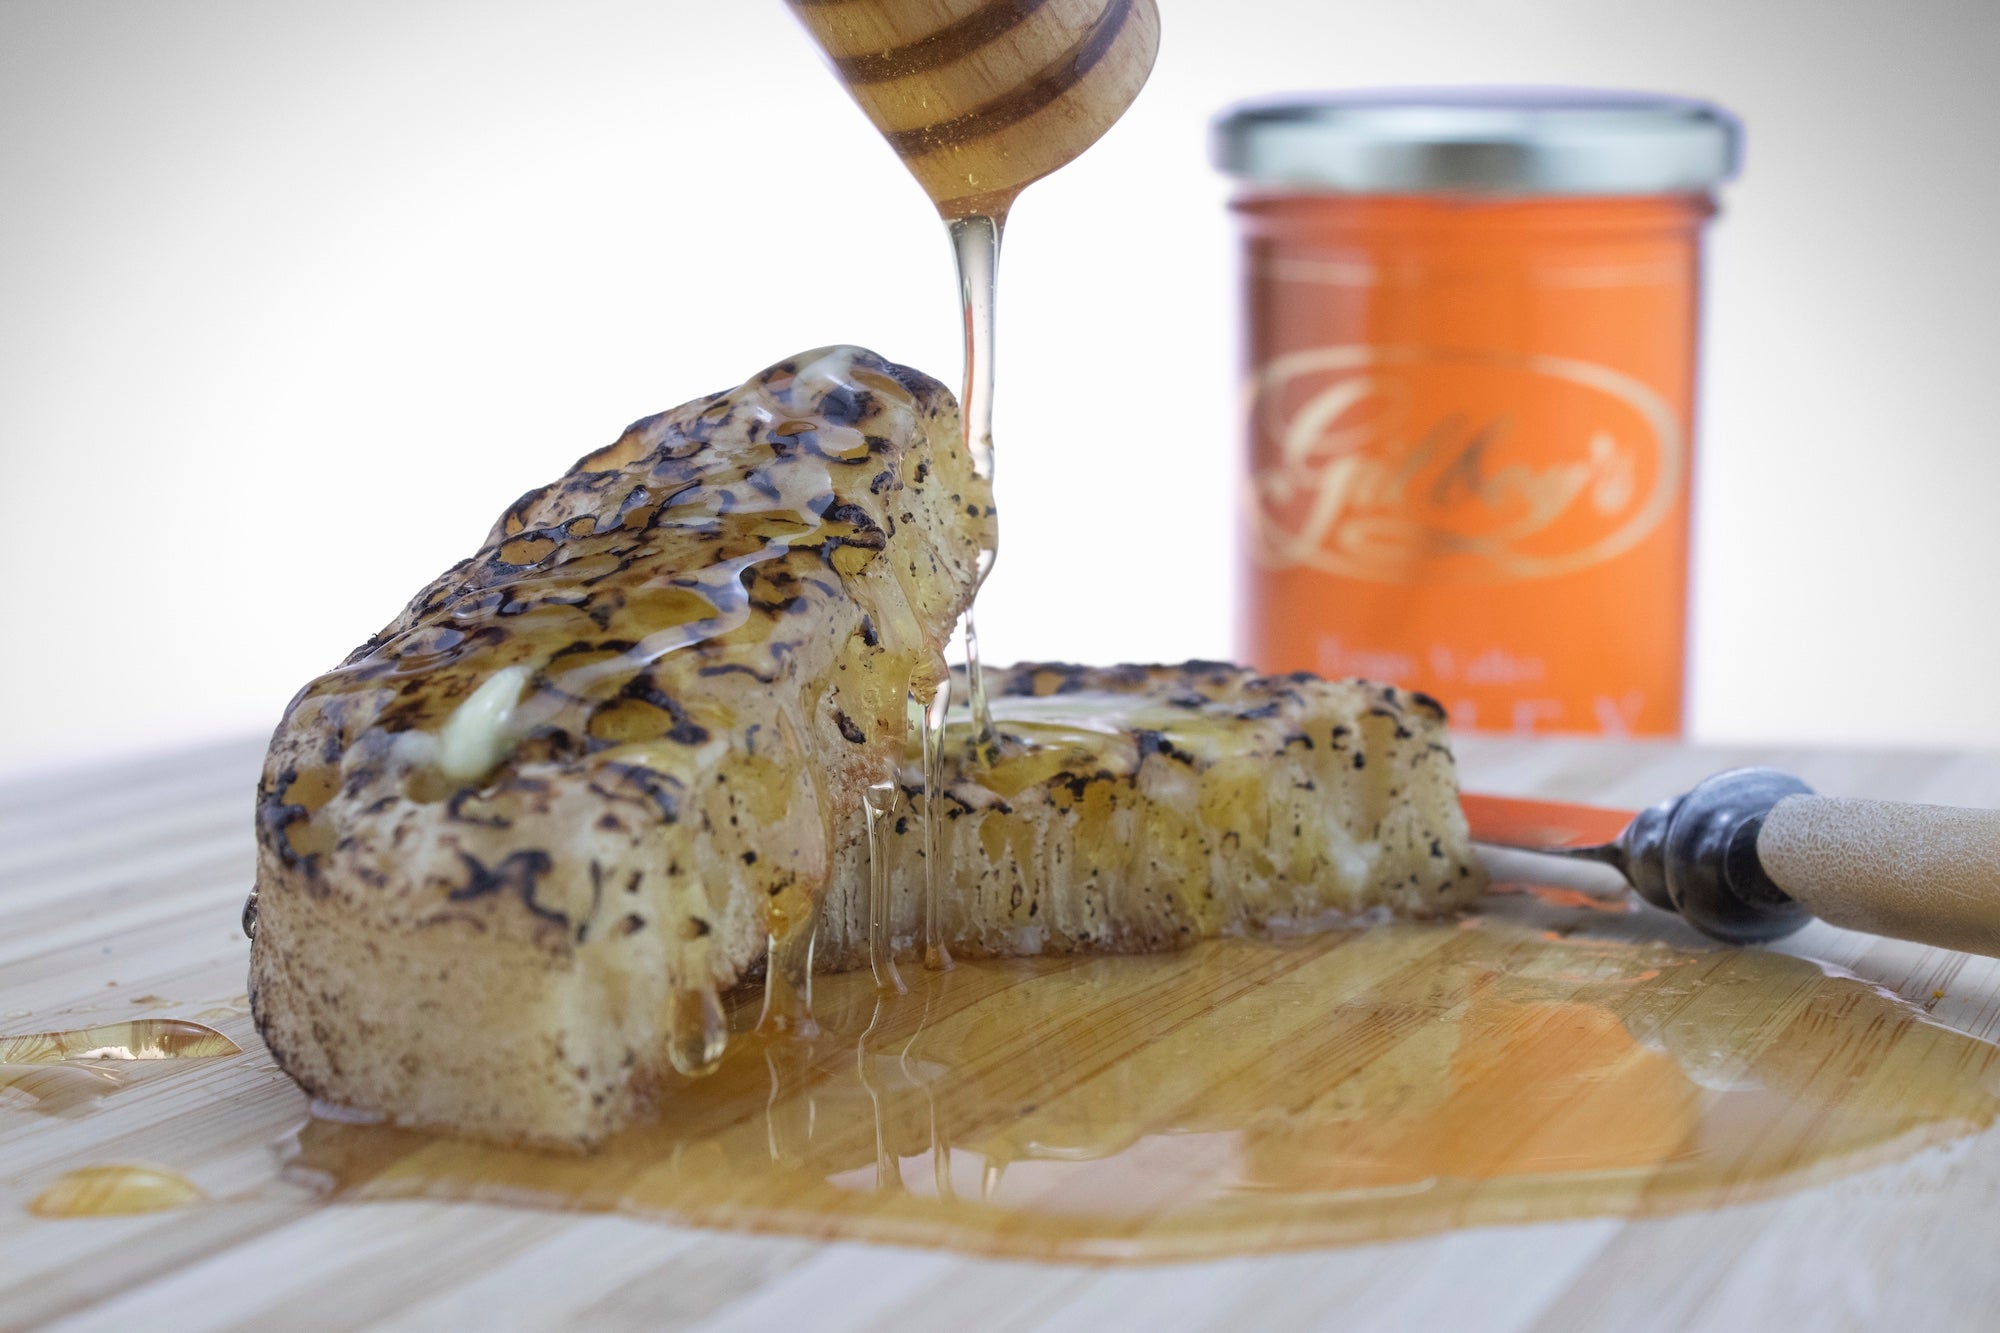 Honey being drizzled on freshly baked crumpets